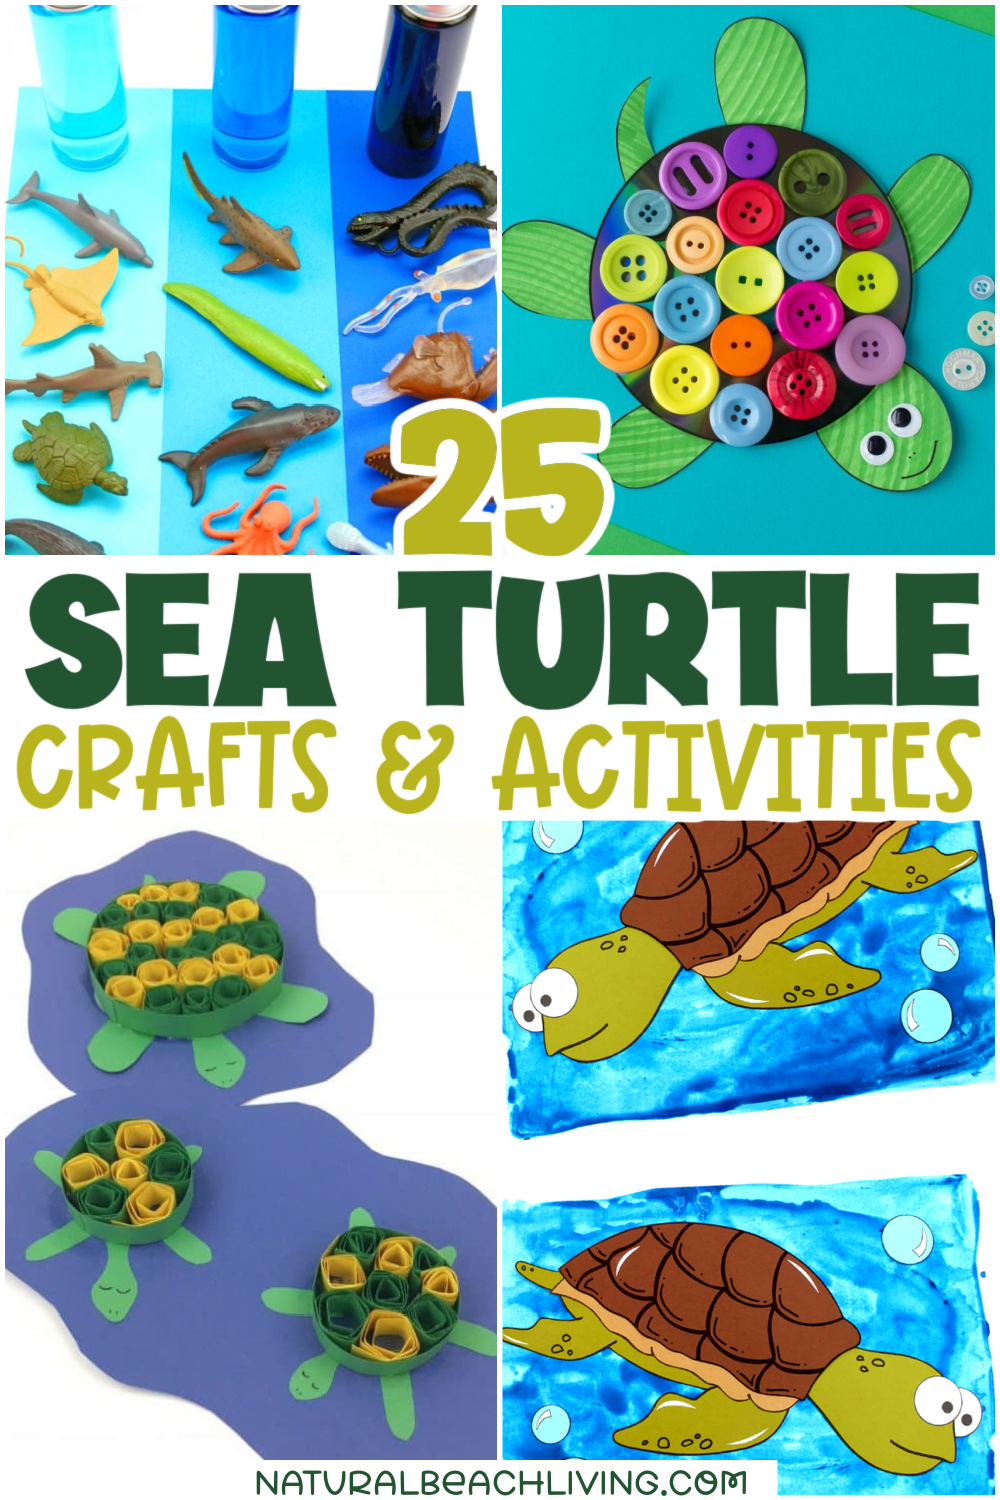 35+ Summer Preschool Themes and Preschool Activities, Parents and Teachers love these hands on activities and Summer Themes. Find Free Printables and over 200 Preschool Lesson Plans, including Ocean activities, Under the Sea theme, preschool crafts, Preschool Science, Outdoor Activities, nature activities, and Tons of summer activities and printables